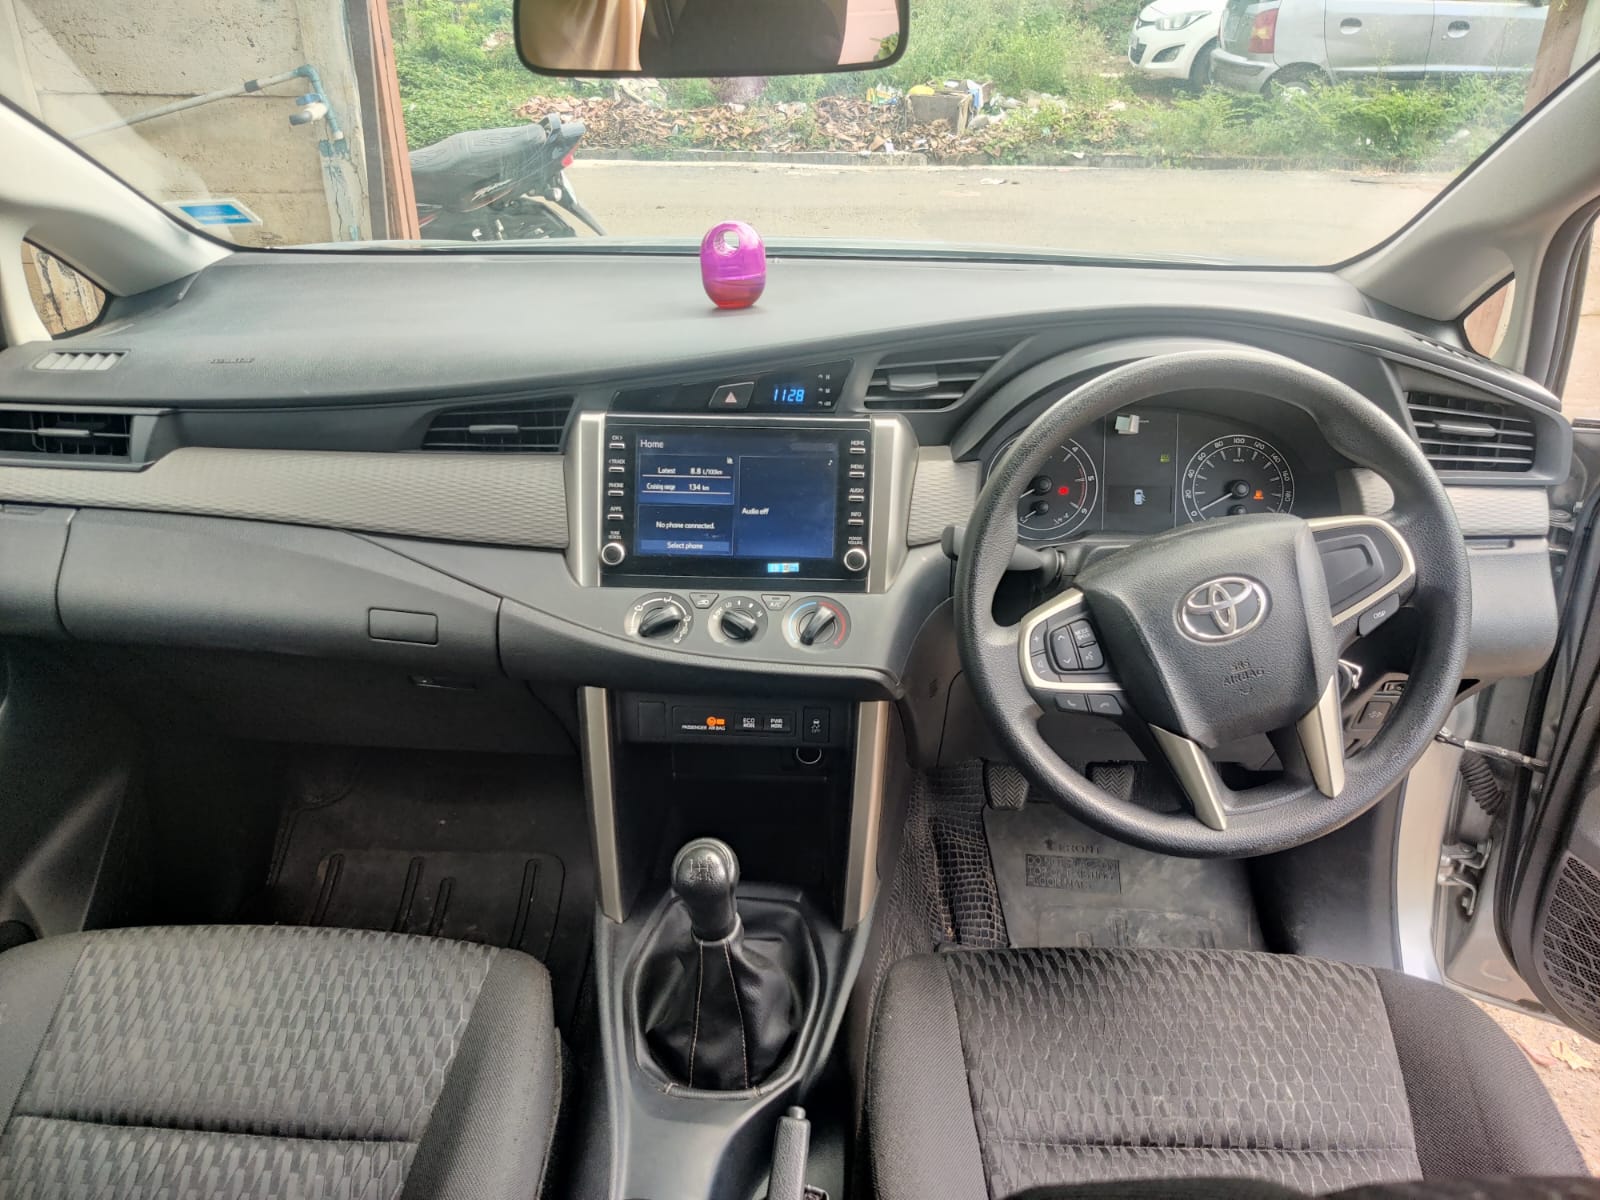 5296-for-sale-Toyota-Innova-Crysta-Diesel-First-Owner-2021-PY-registered-rs-2130000